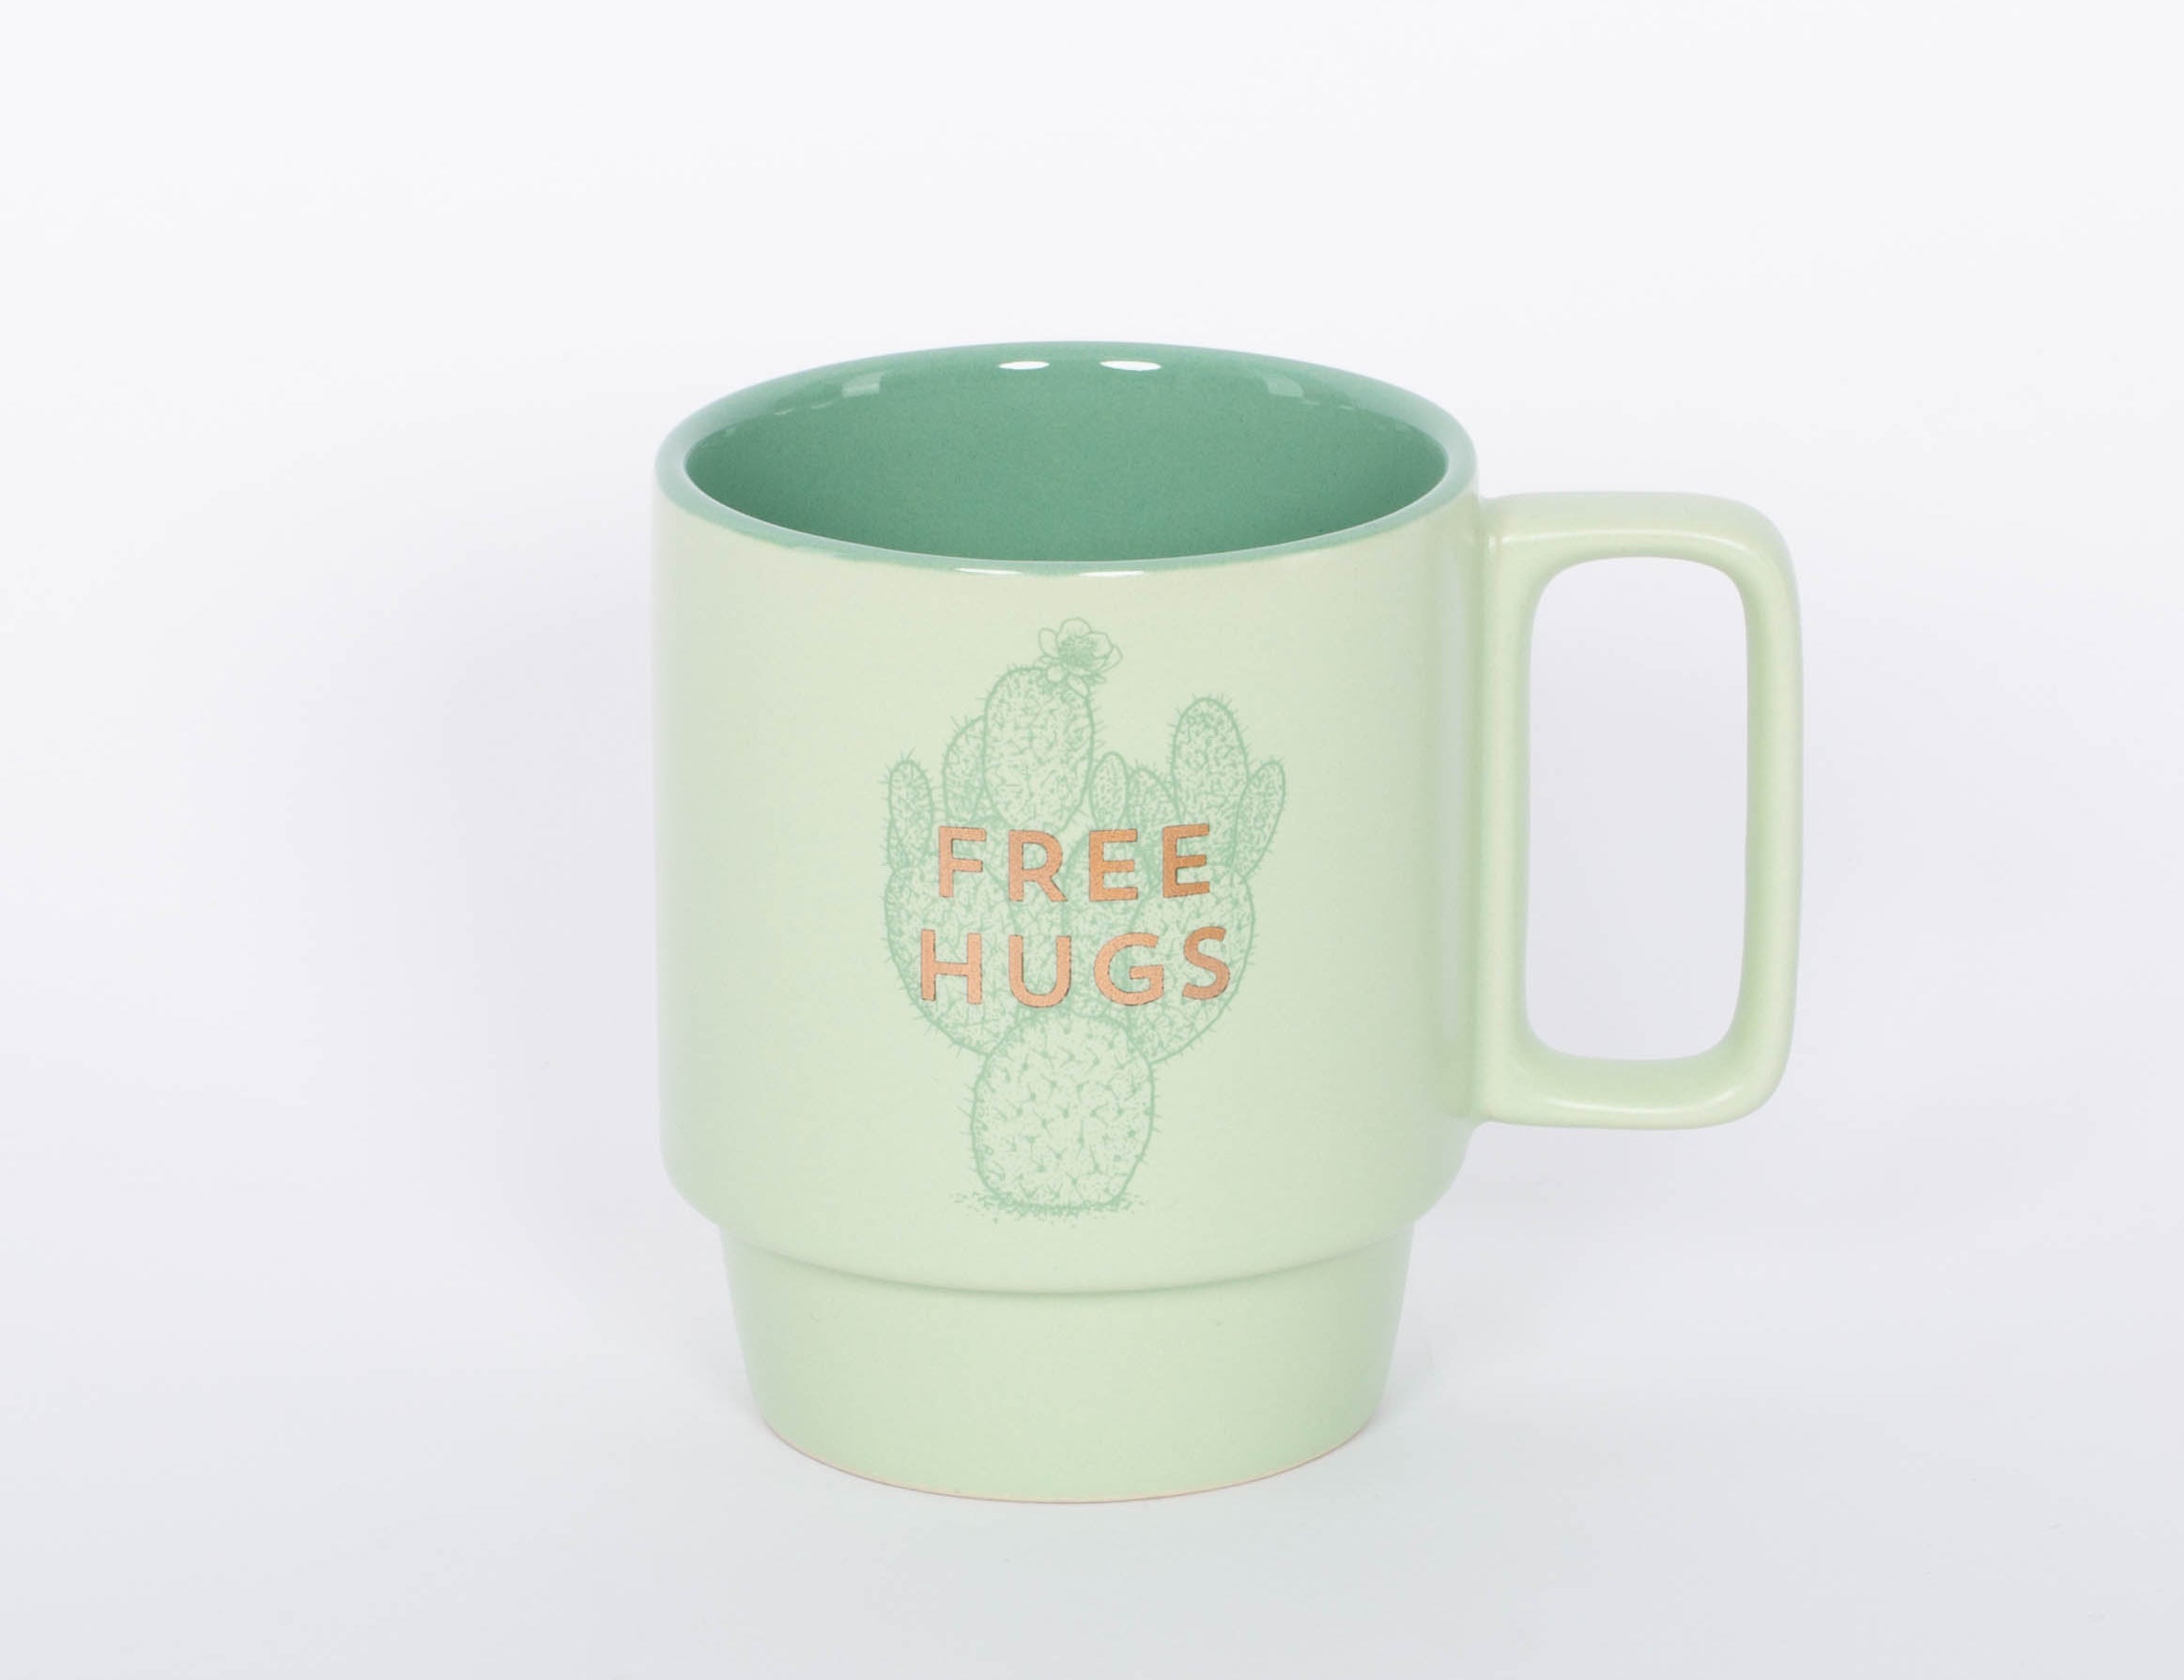 Free Hugs Mug. Crafted of high-quality ceramic, this stackable mug features a sassy sentiment in metallic gold lettering. This 12 oz. cactus mug is the perfect companion to your morning routine whether it's for a cup of coffee, hot cocoa, or tea. It also makes a great gift for the plant lover in your life!